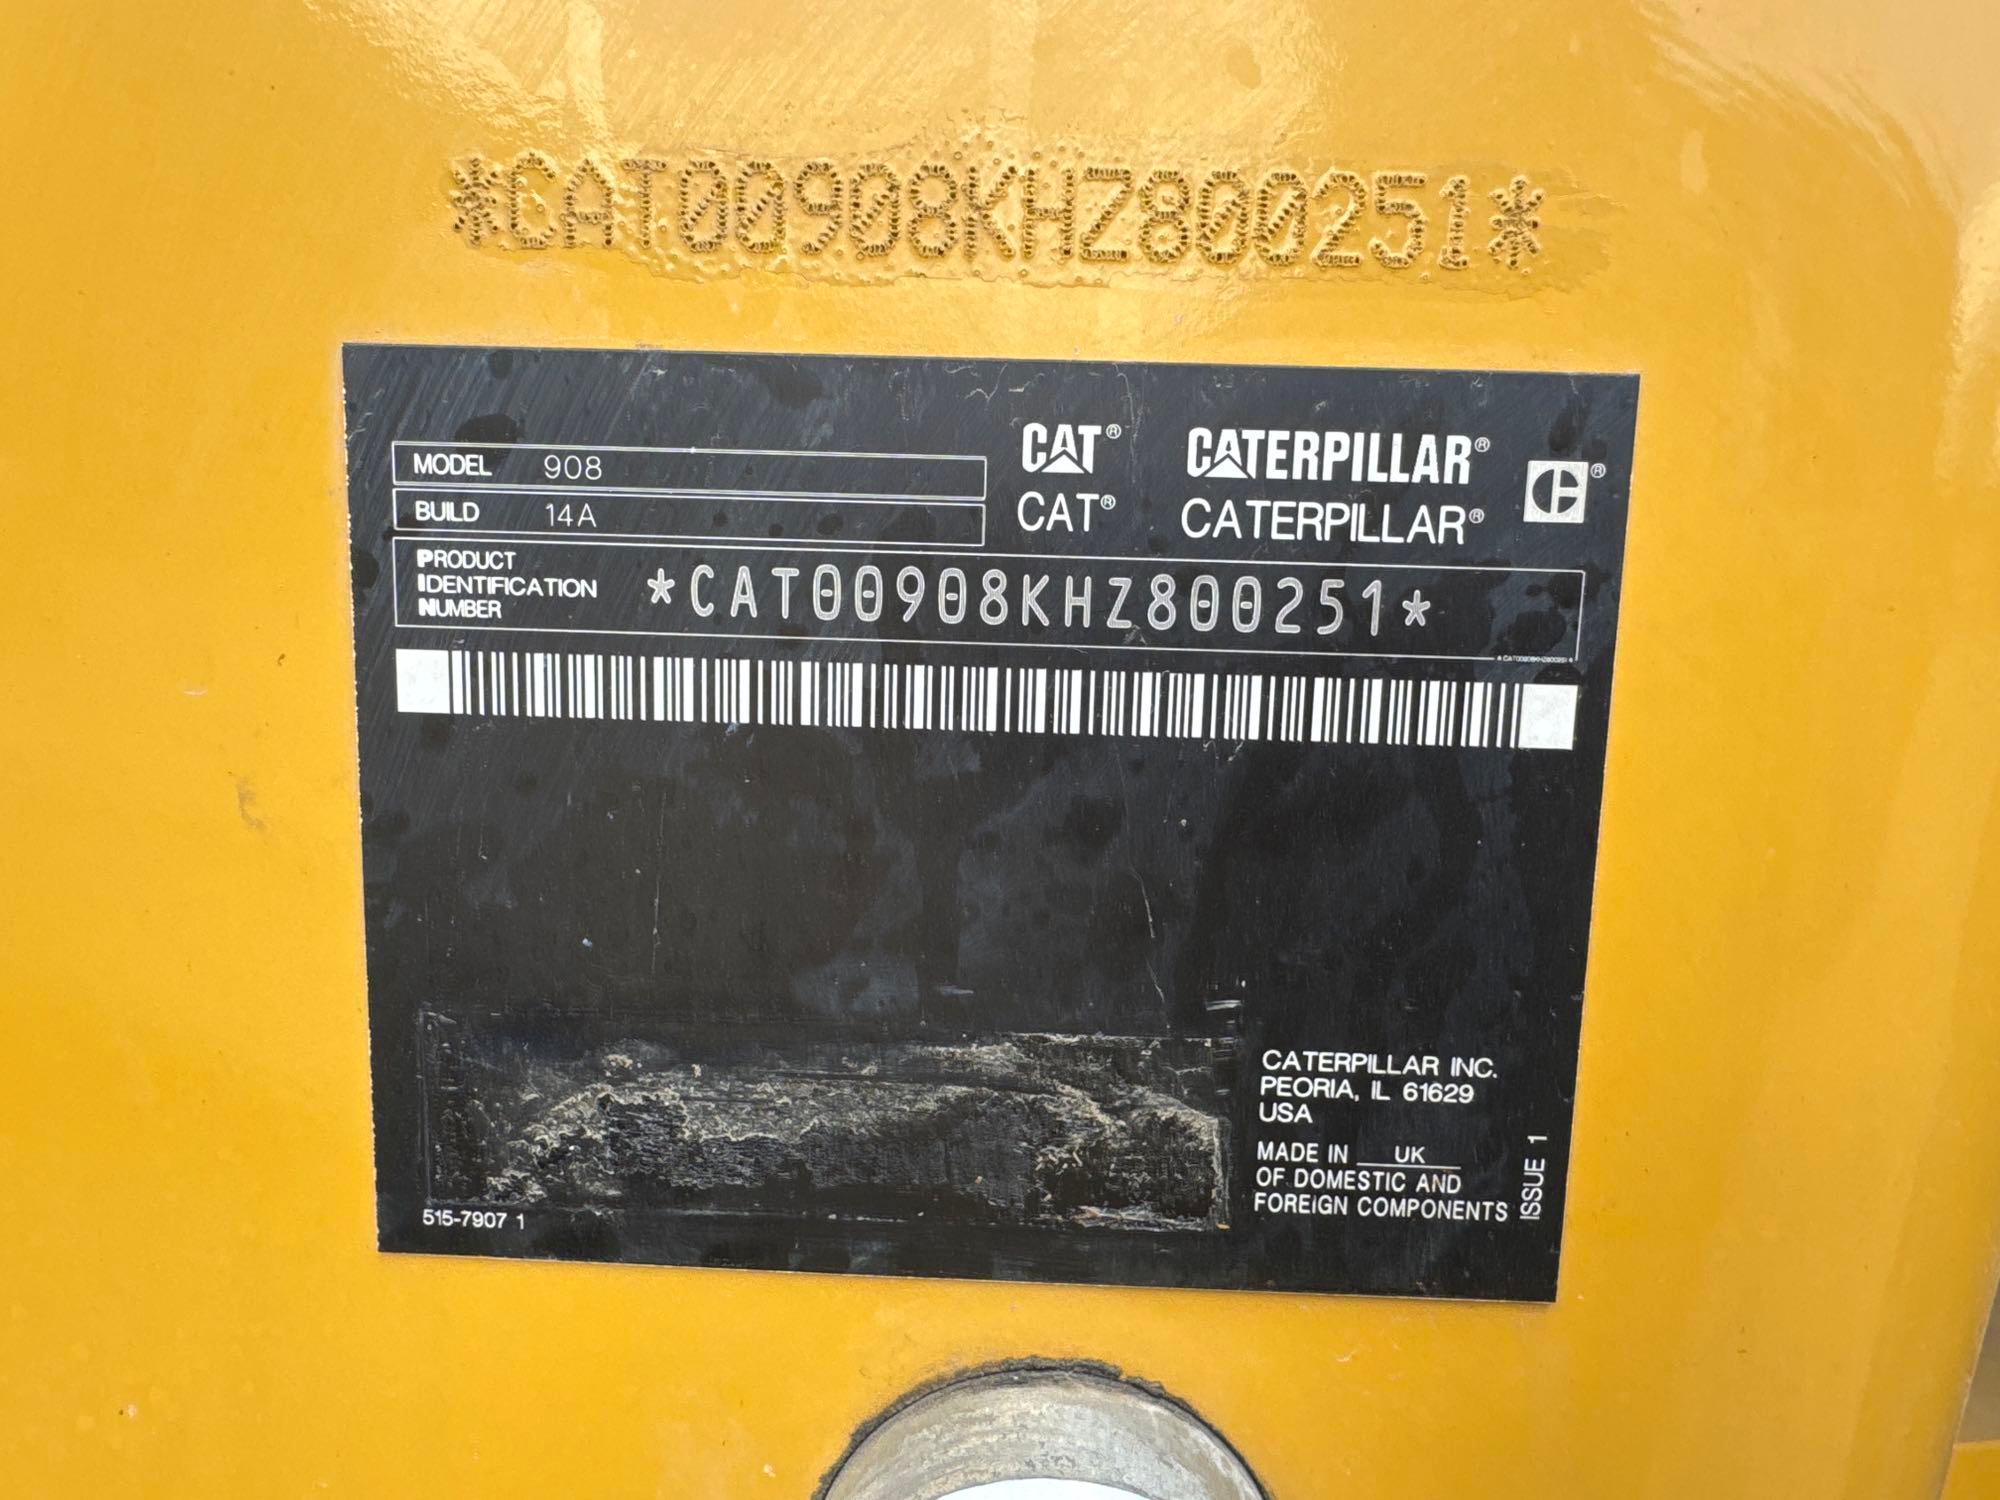 2022 CAT 908 RUBBER TIRED LOADER SN:800251 powered by Cat C2.8 diesel engine, equipped with EROPS,